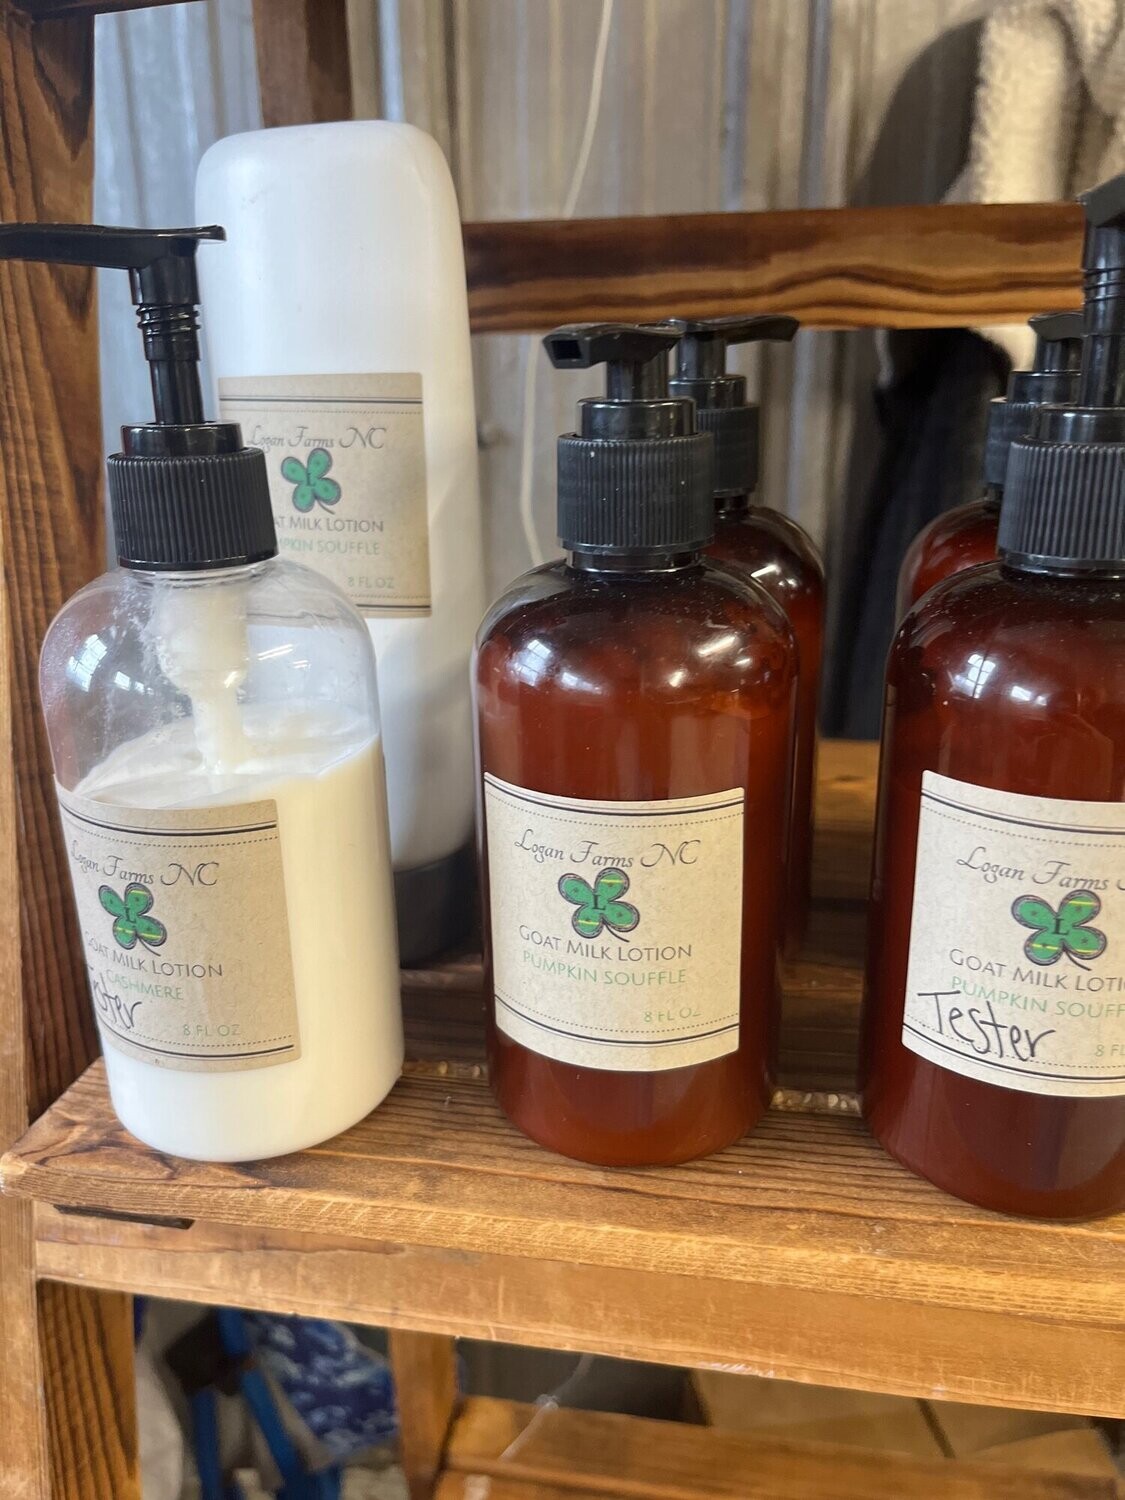 Unscented Goat's Milk Lotion from Logan Farms NC